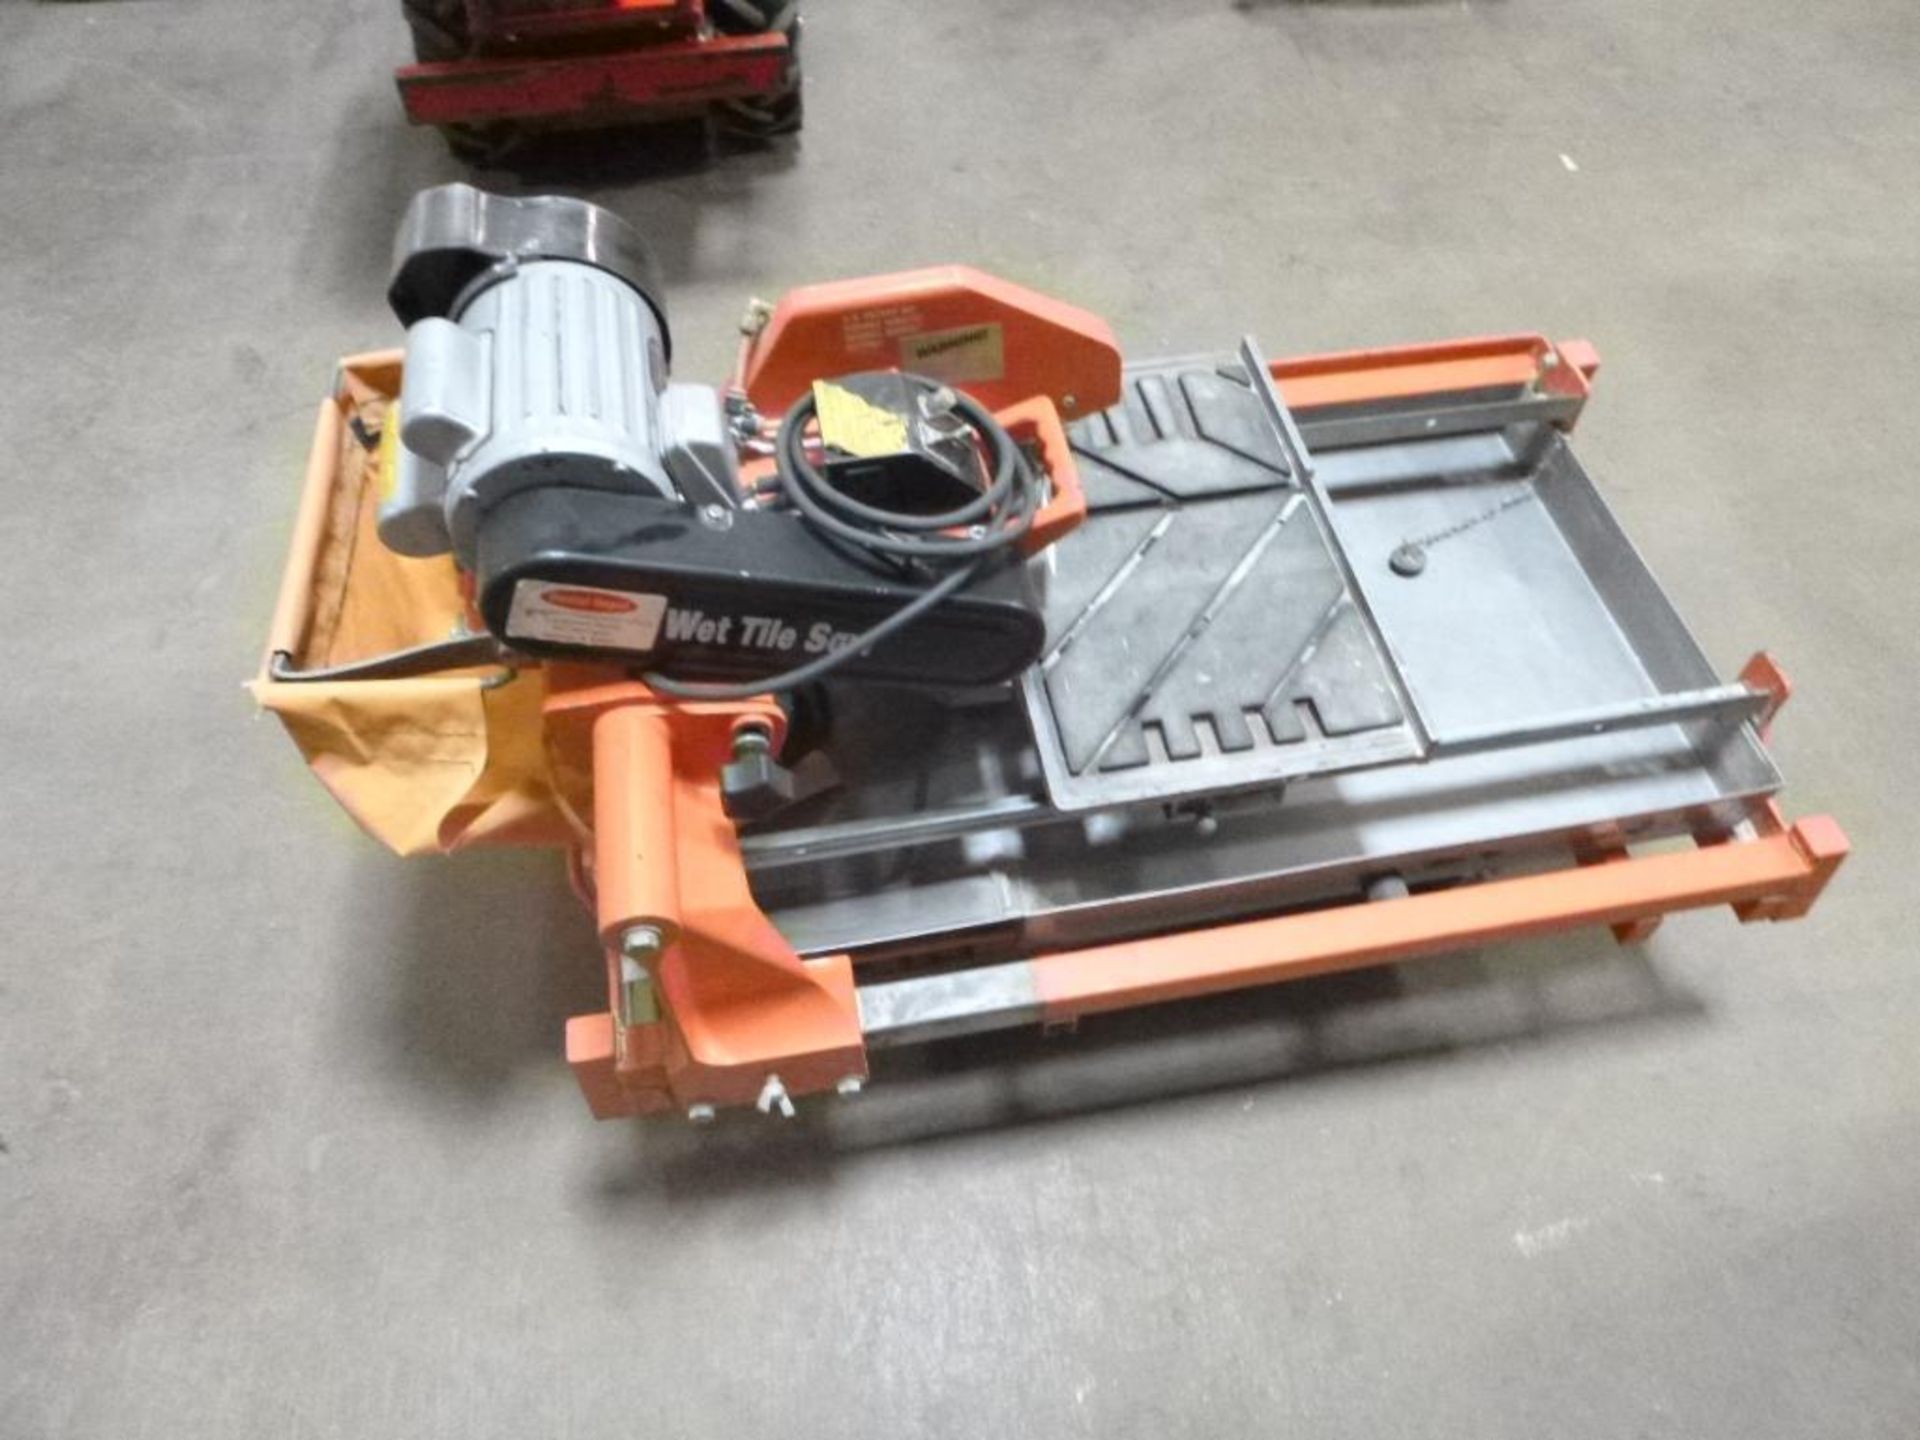 LOT: Core Cut CC1000T 10 in. Tile Saw, S/N CC110163, with Stand, Cuts 24 in. Tile - Image 5 of 8